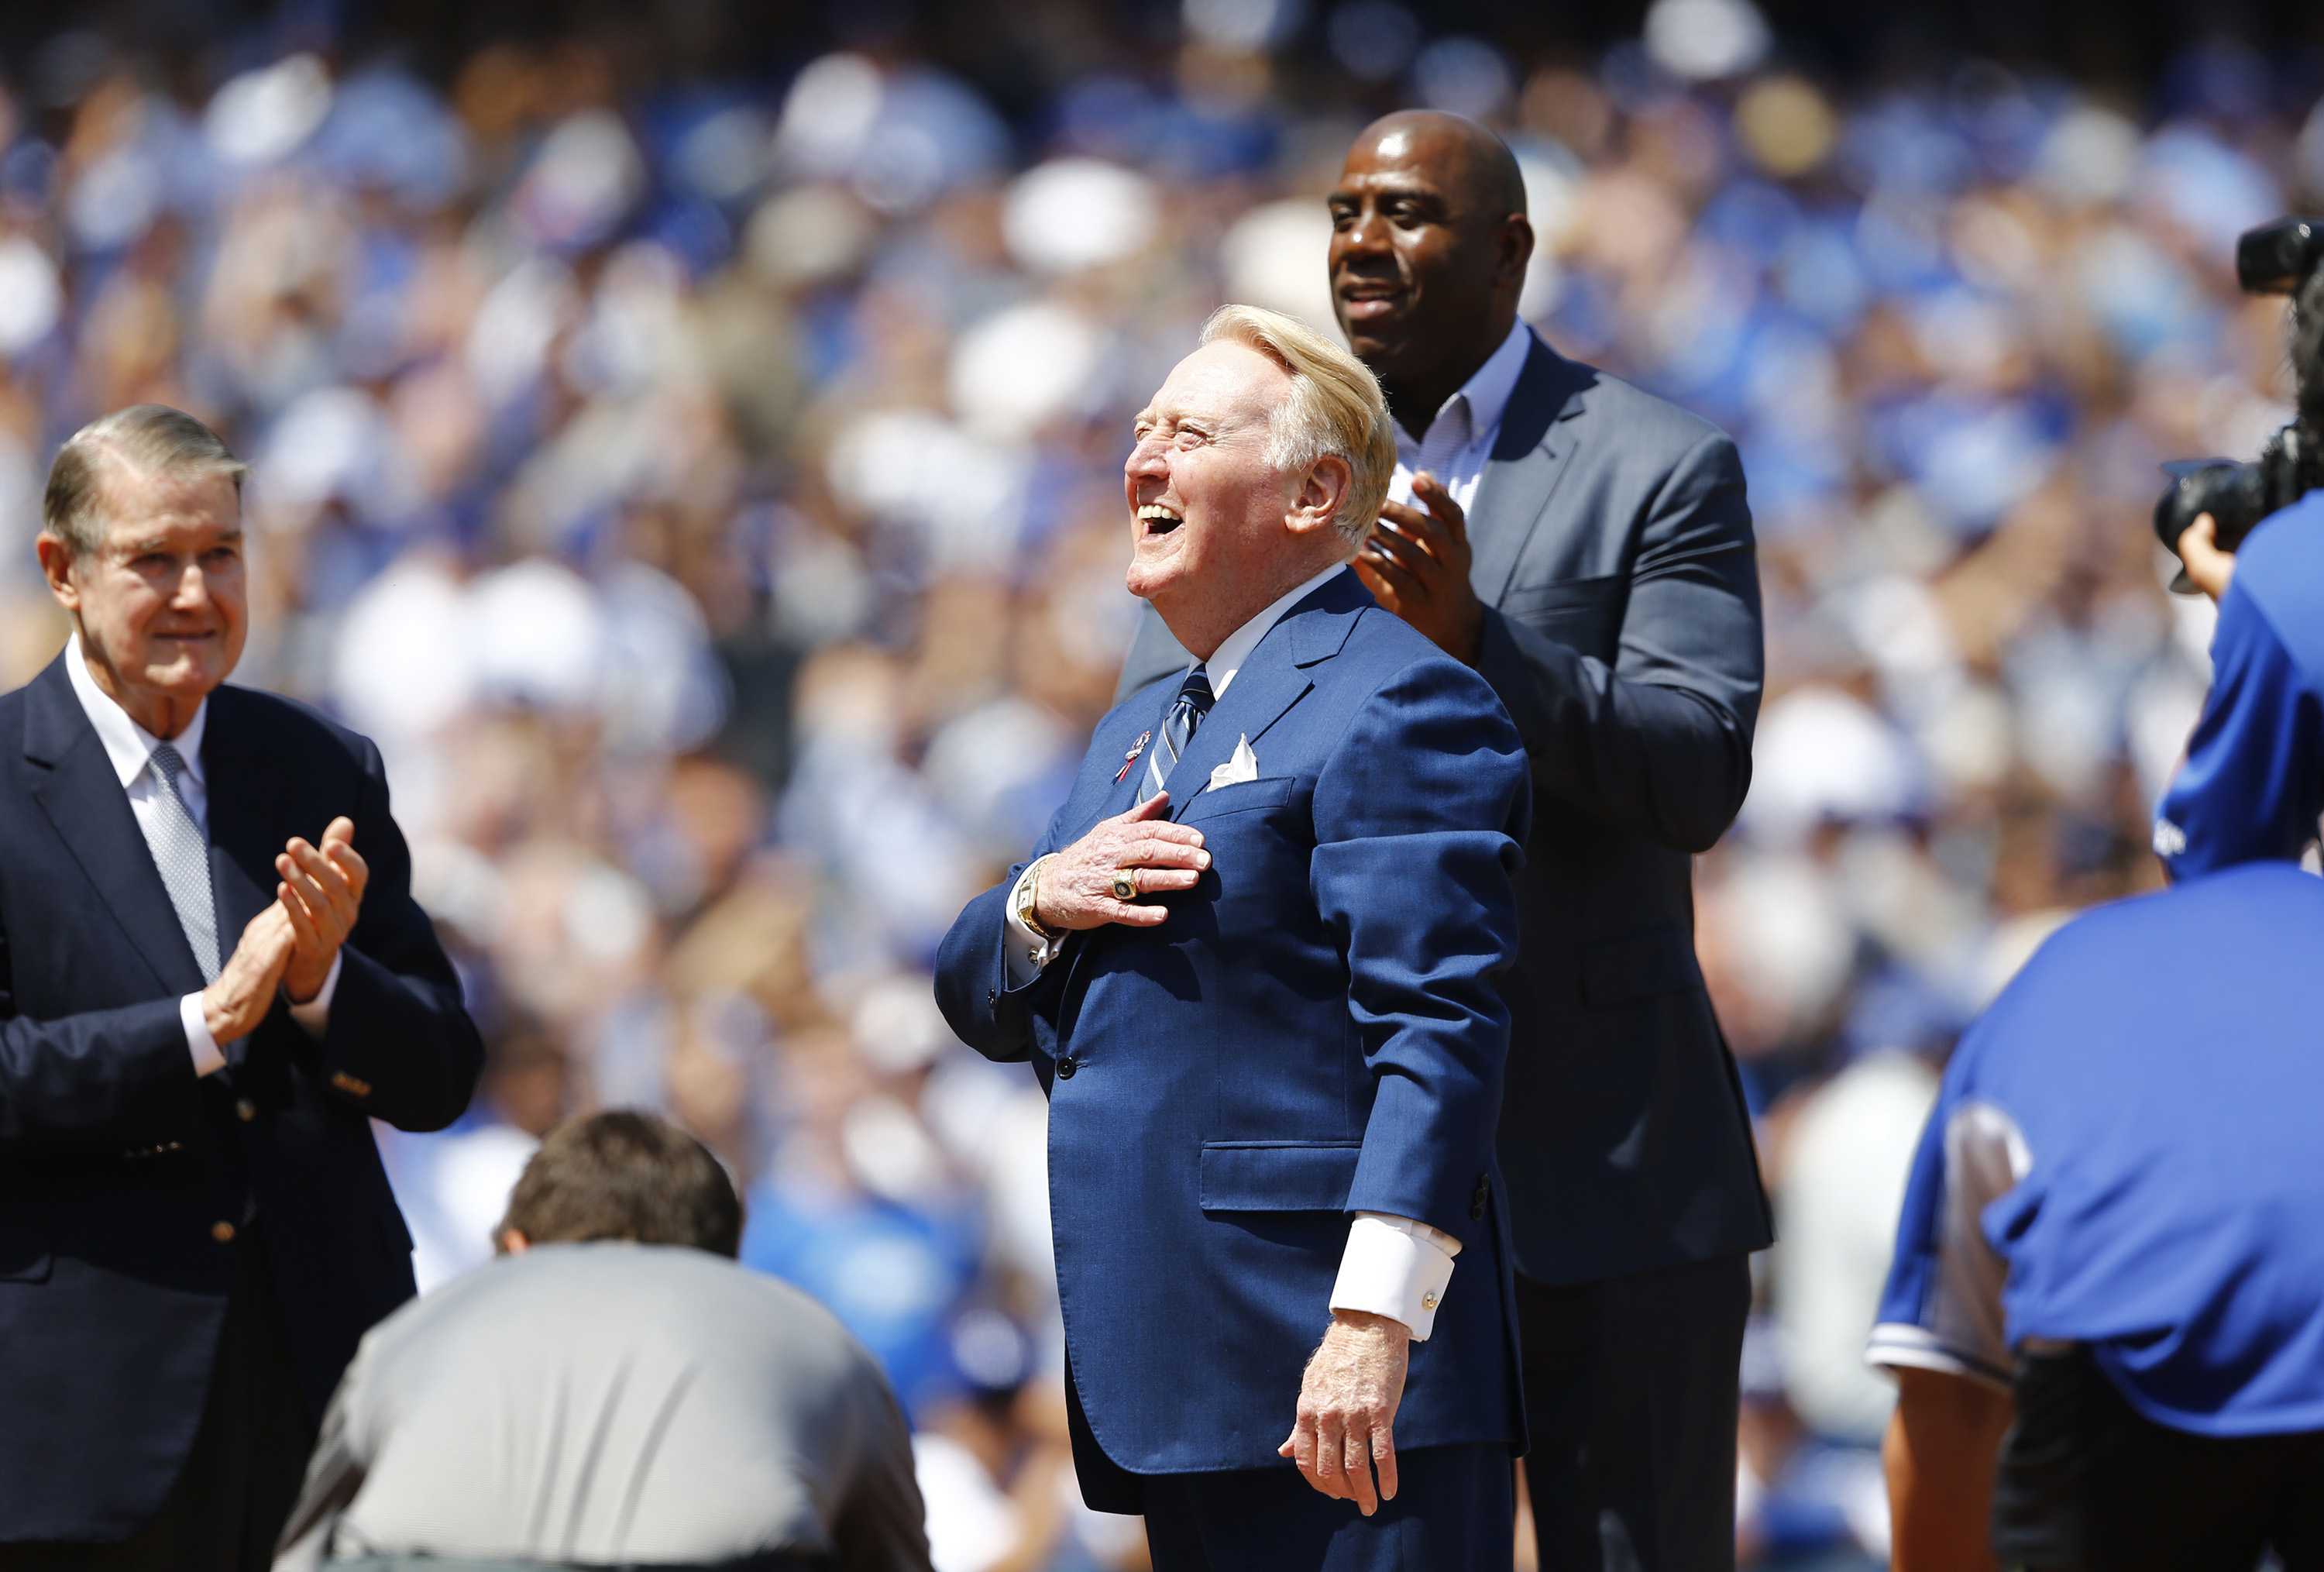 Los Angeles Dodgers announcer Vin Scully is honored at home plate in a pregame ceremony on his last Opening Day, on Tuesday, April 12, 2016, at Dodger Stadium in Los Angeles. Former Dodgers owner Peter O'Malley, left, and Magic Johnson, top, are also on hand. (Gina Ferazzi/Los Angeles Times/TNS/MCT)